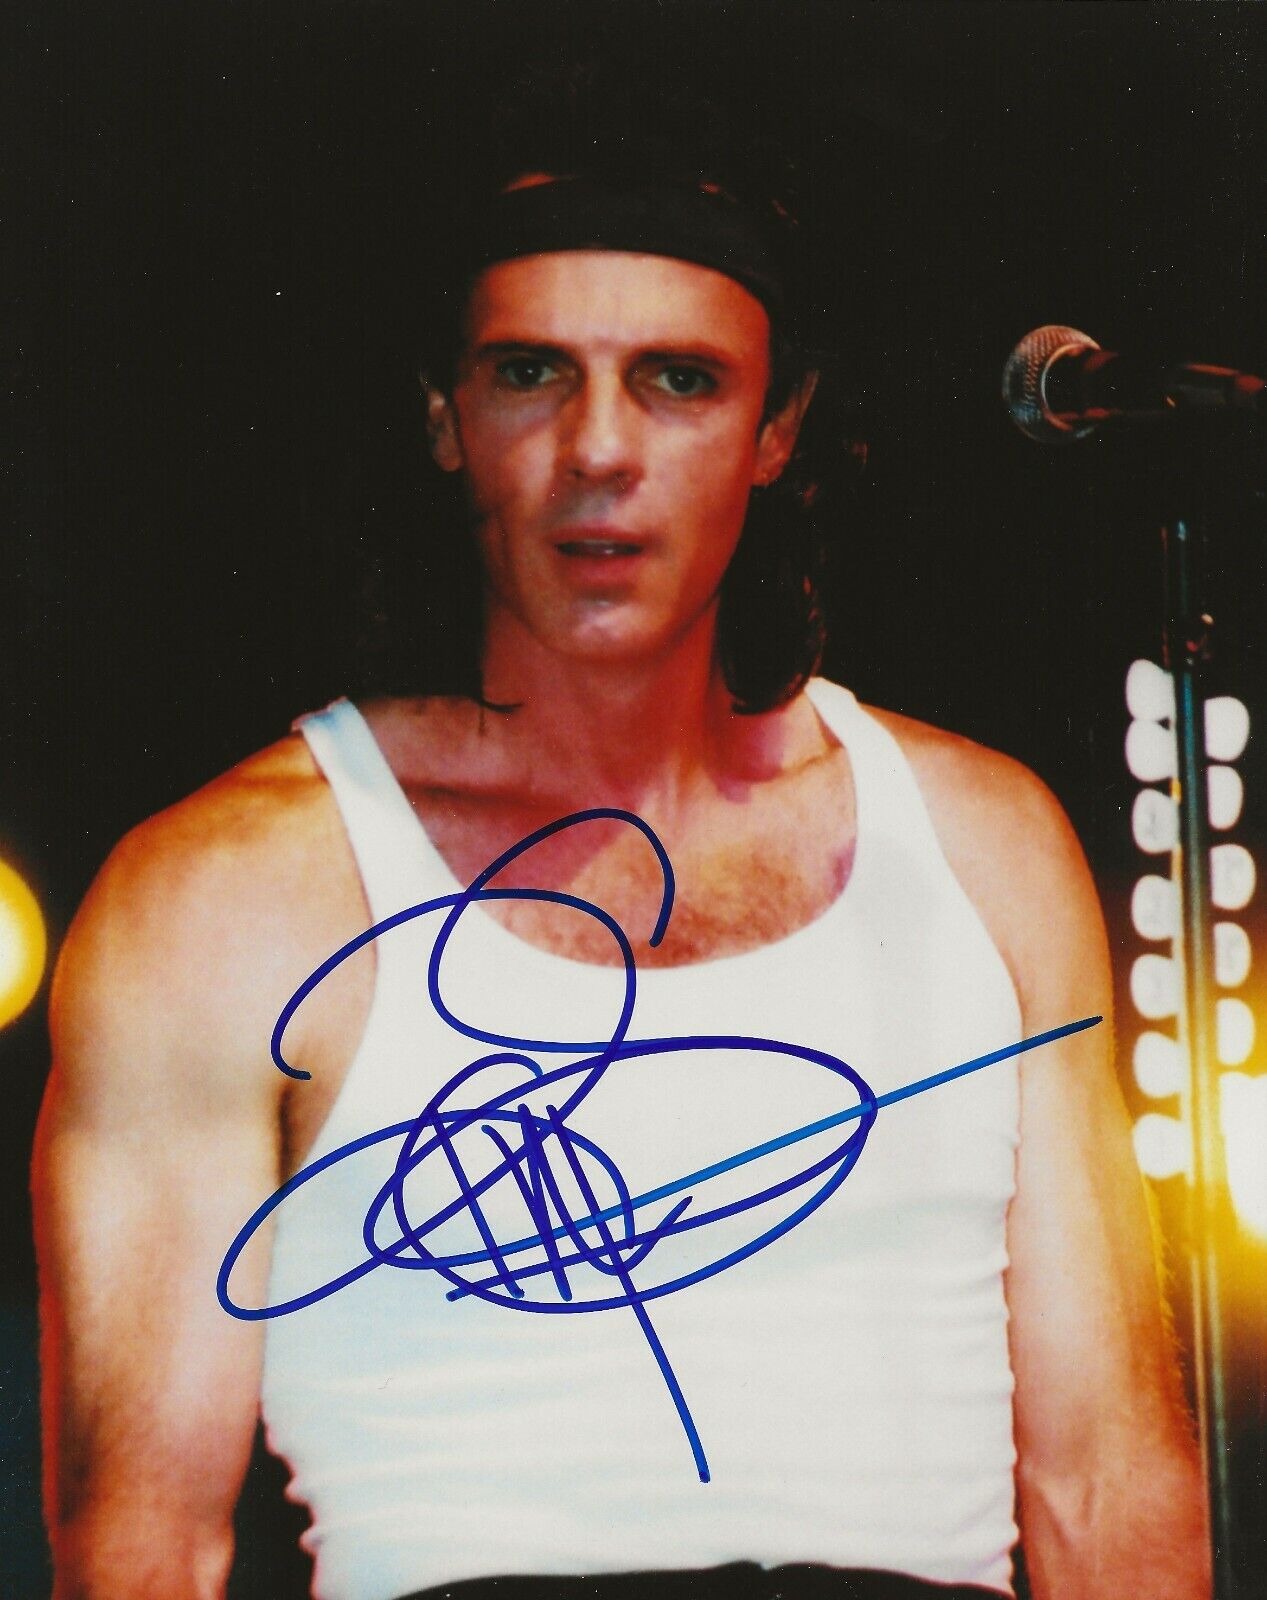 Rick Springfield singer REAL hand SIGNED 8x10 Photo Poster painting #1 w/ COA Jessie's Girl